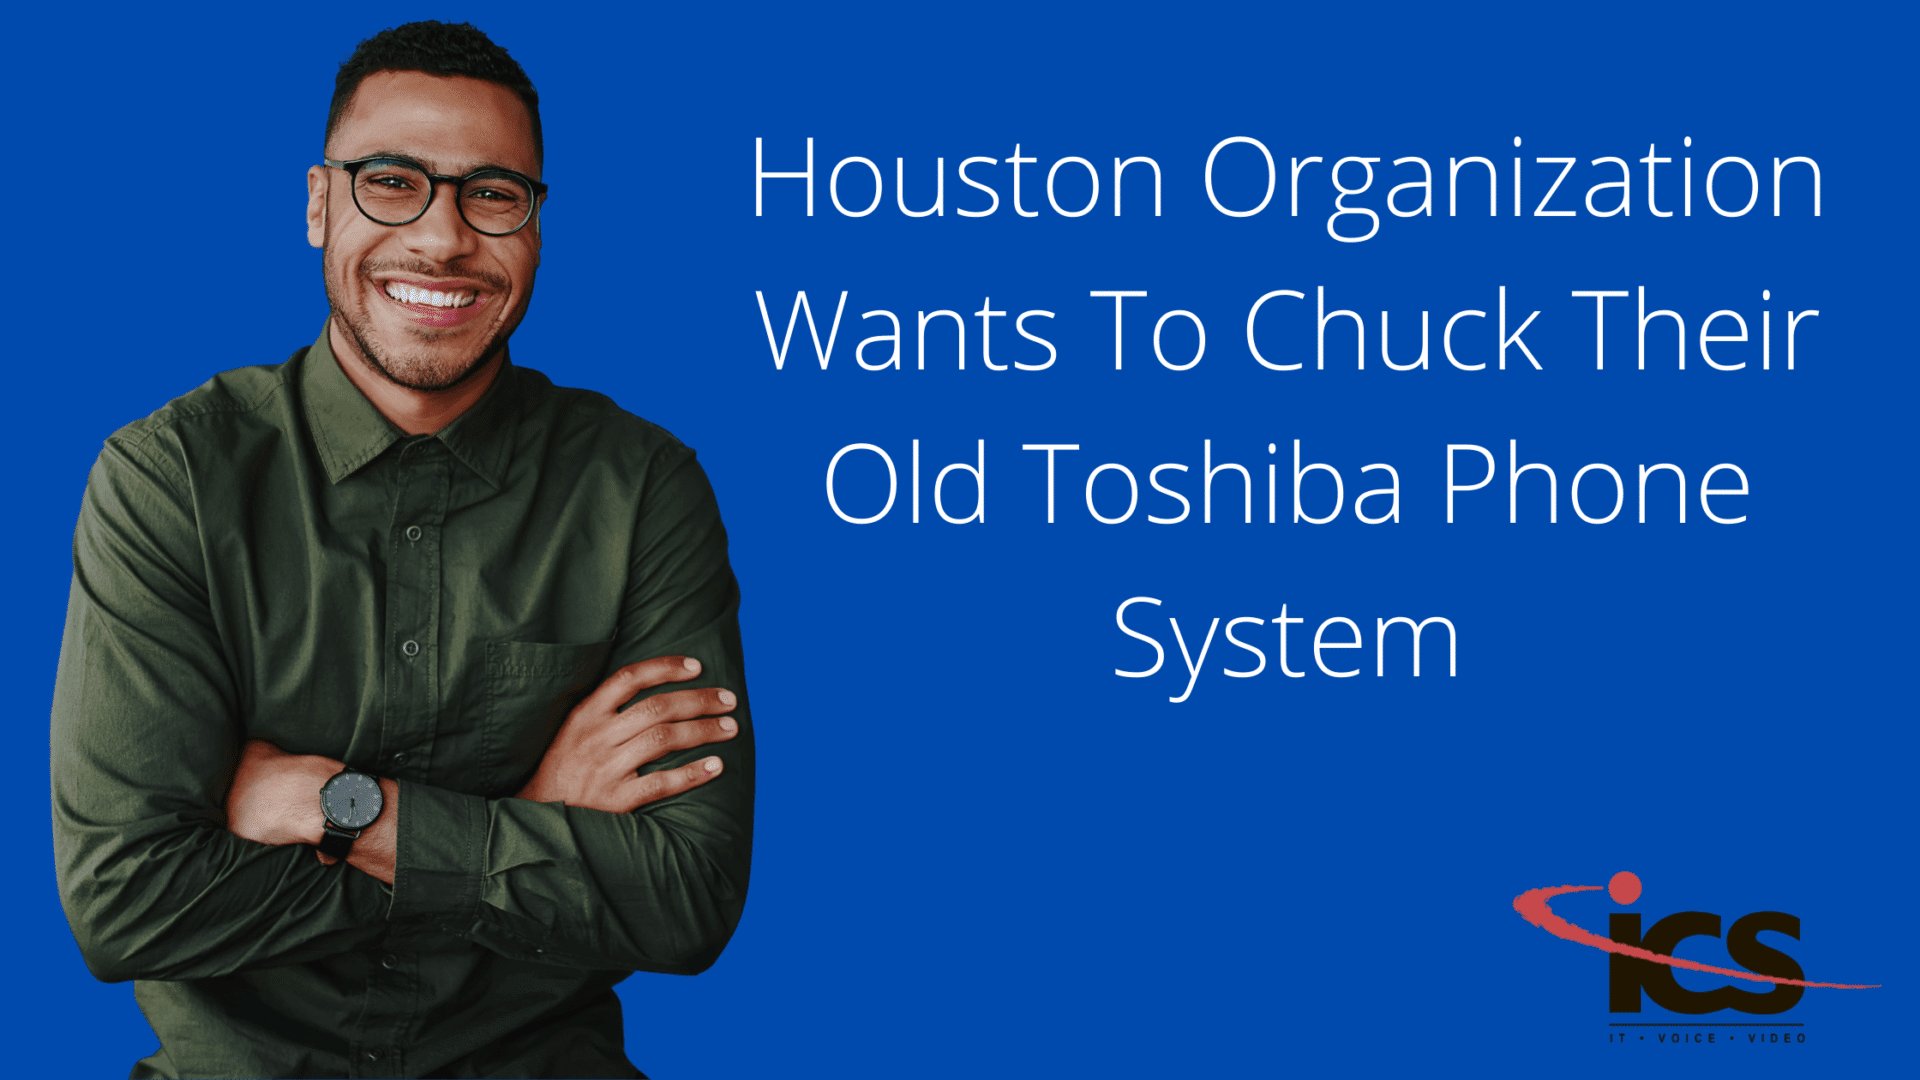 Houston Organization Wants To Chuck Their Old Toshiba Phone System